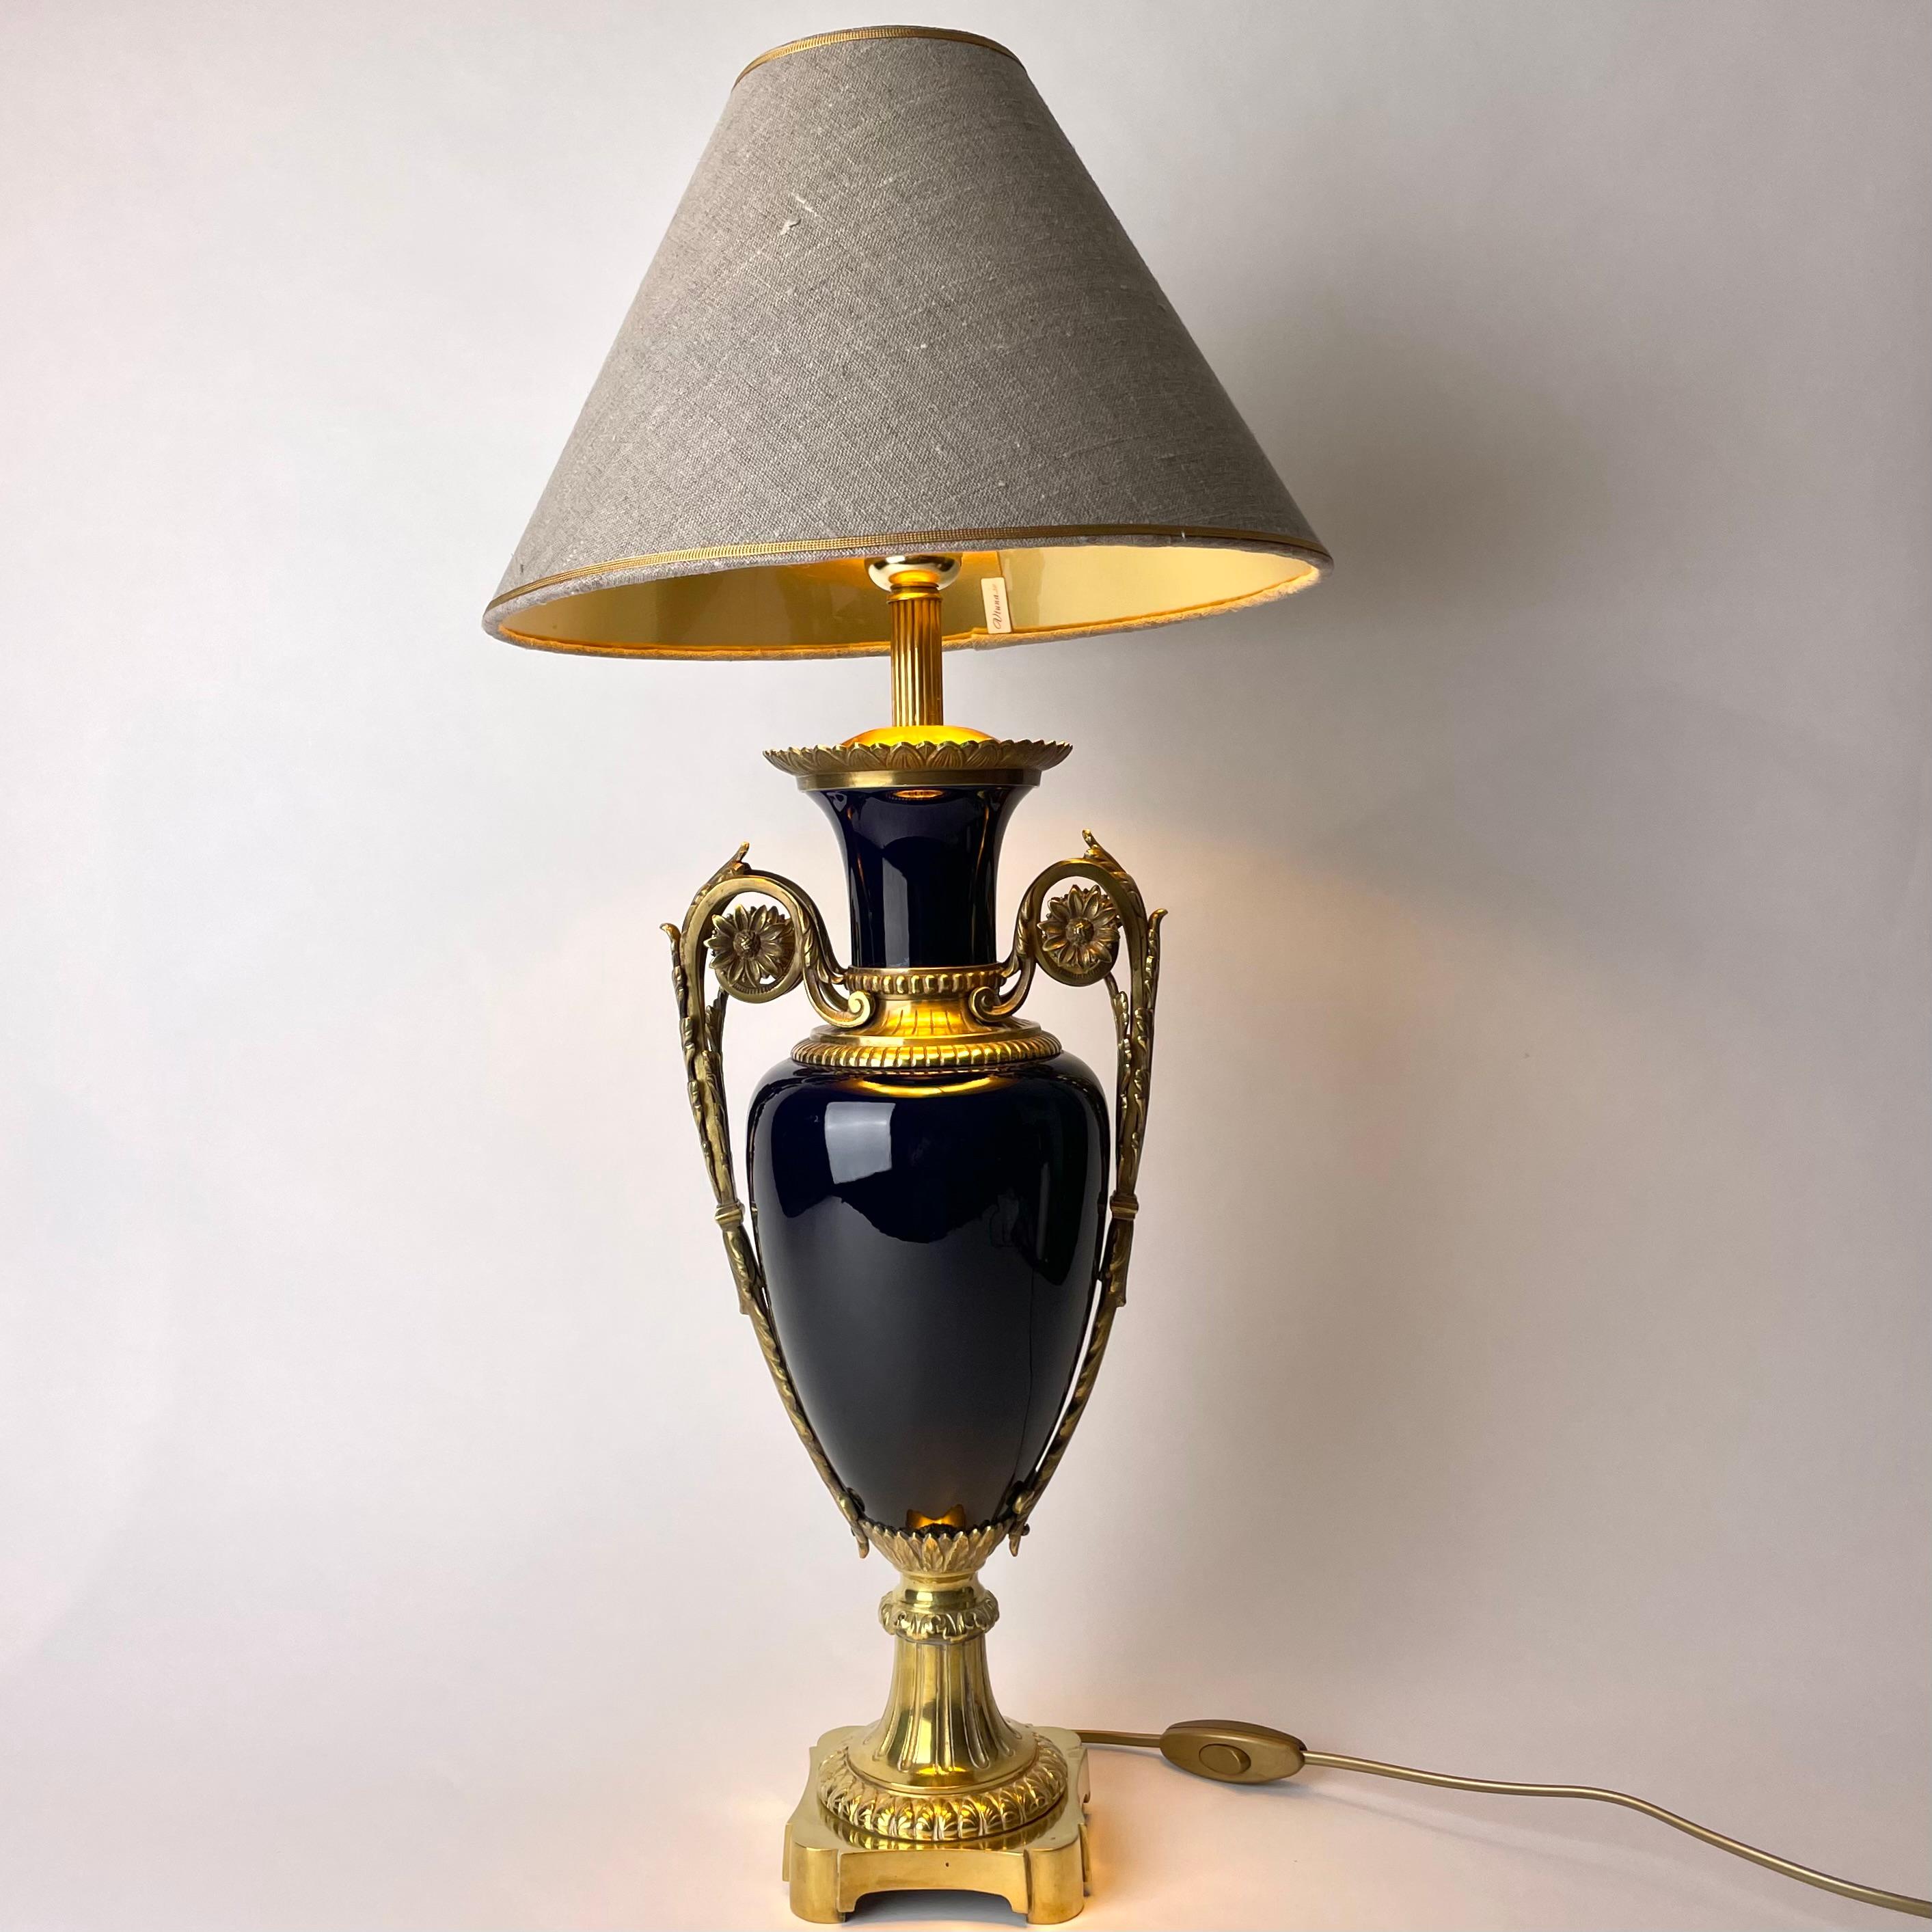 Magnificent Table Lamp in bronze & porcelain. Louis XVI style from the early 20th Century.  Elegantly decorated and with a sophisticated color on the china. 

Newly rewired electricity 

Lampshade in linen with gilding on the inside to give a cozy